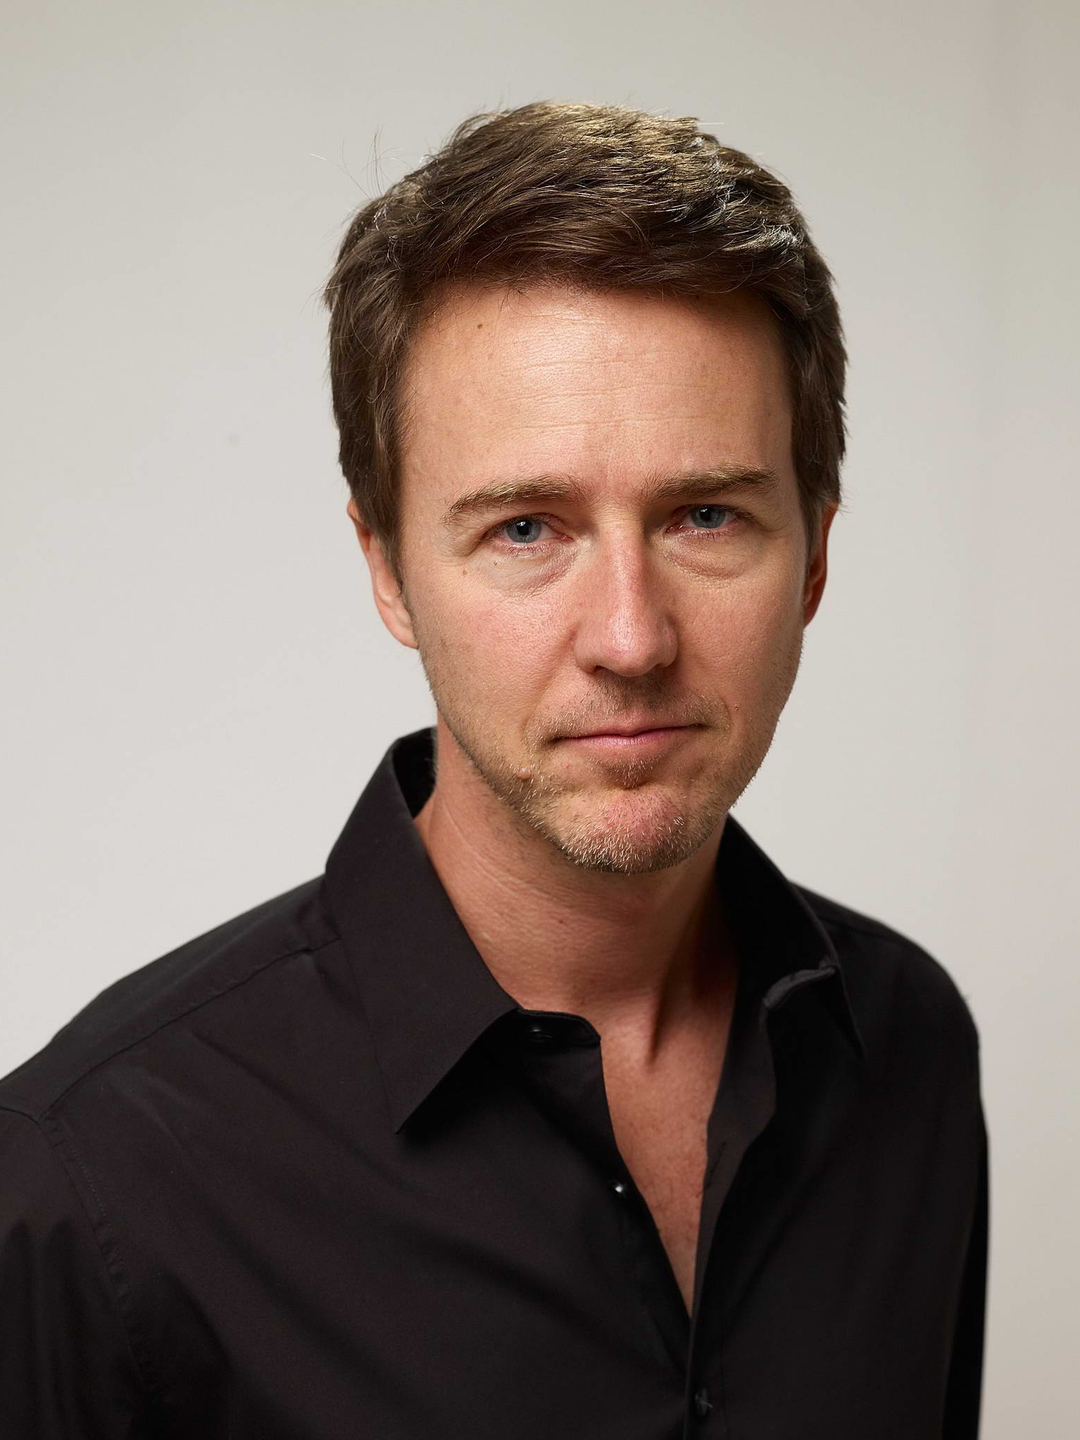 Edward Norton where is he now